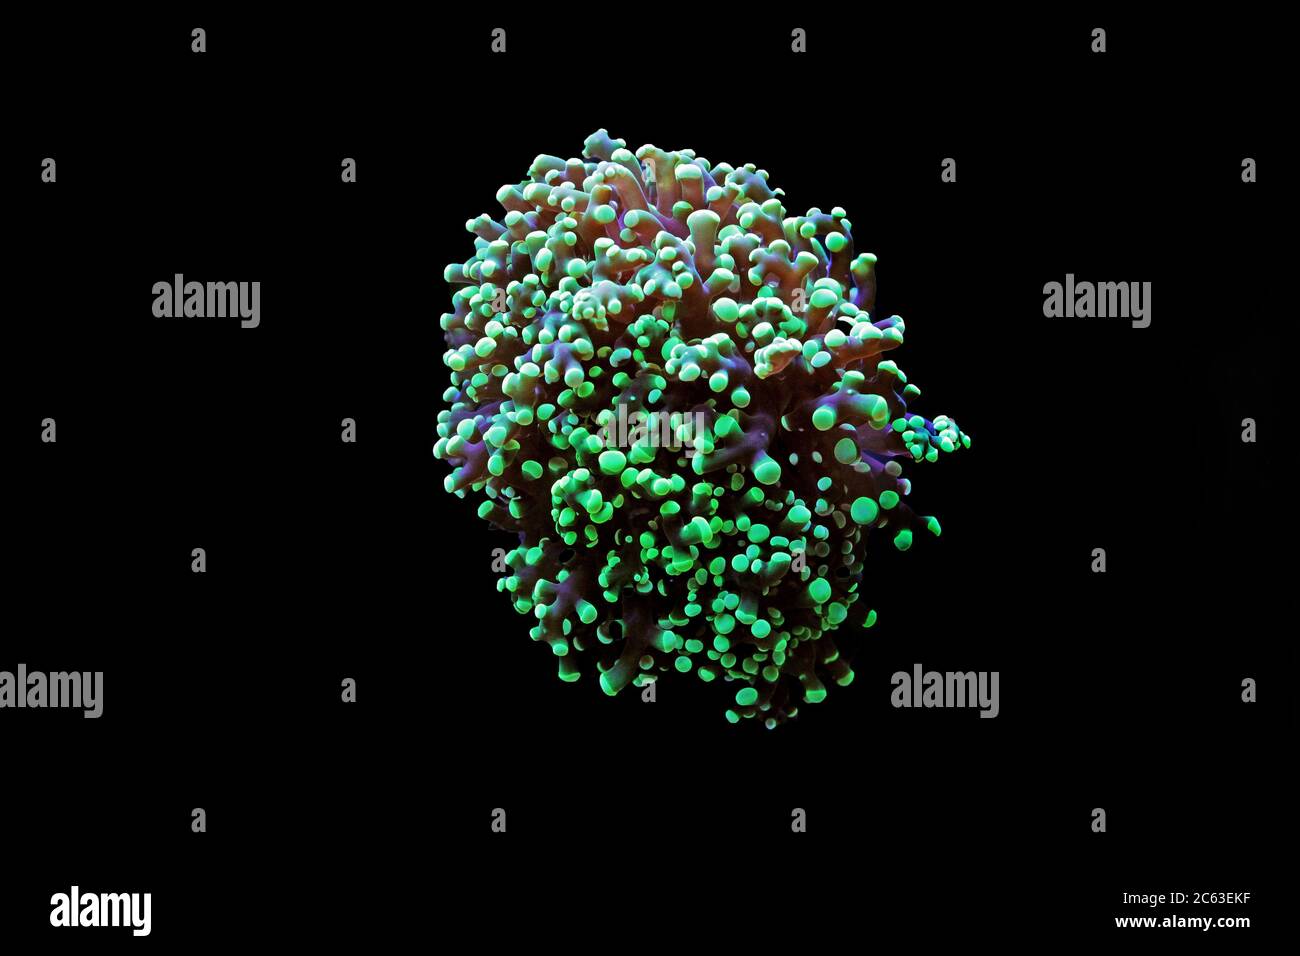 Colorful scene in aquarium with Euphyllia LPS colorful coral Stock Photo